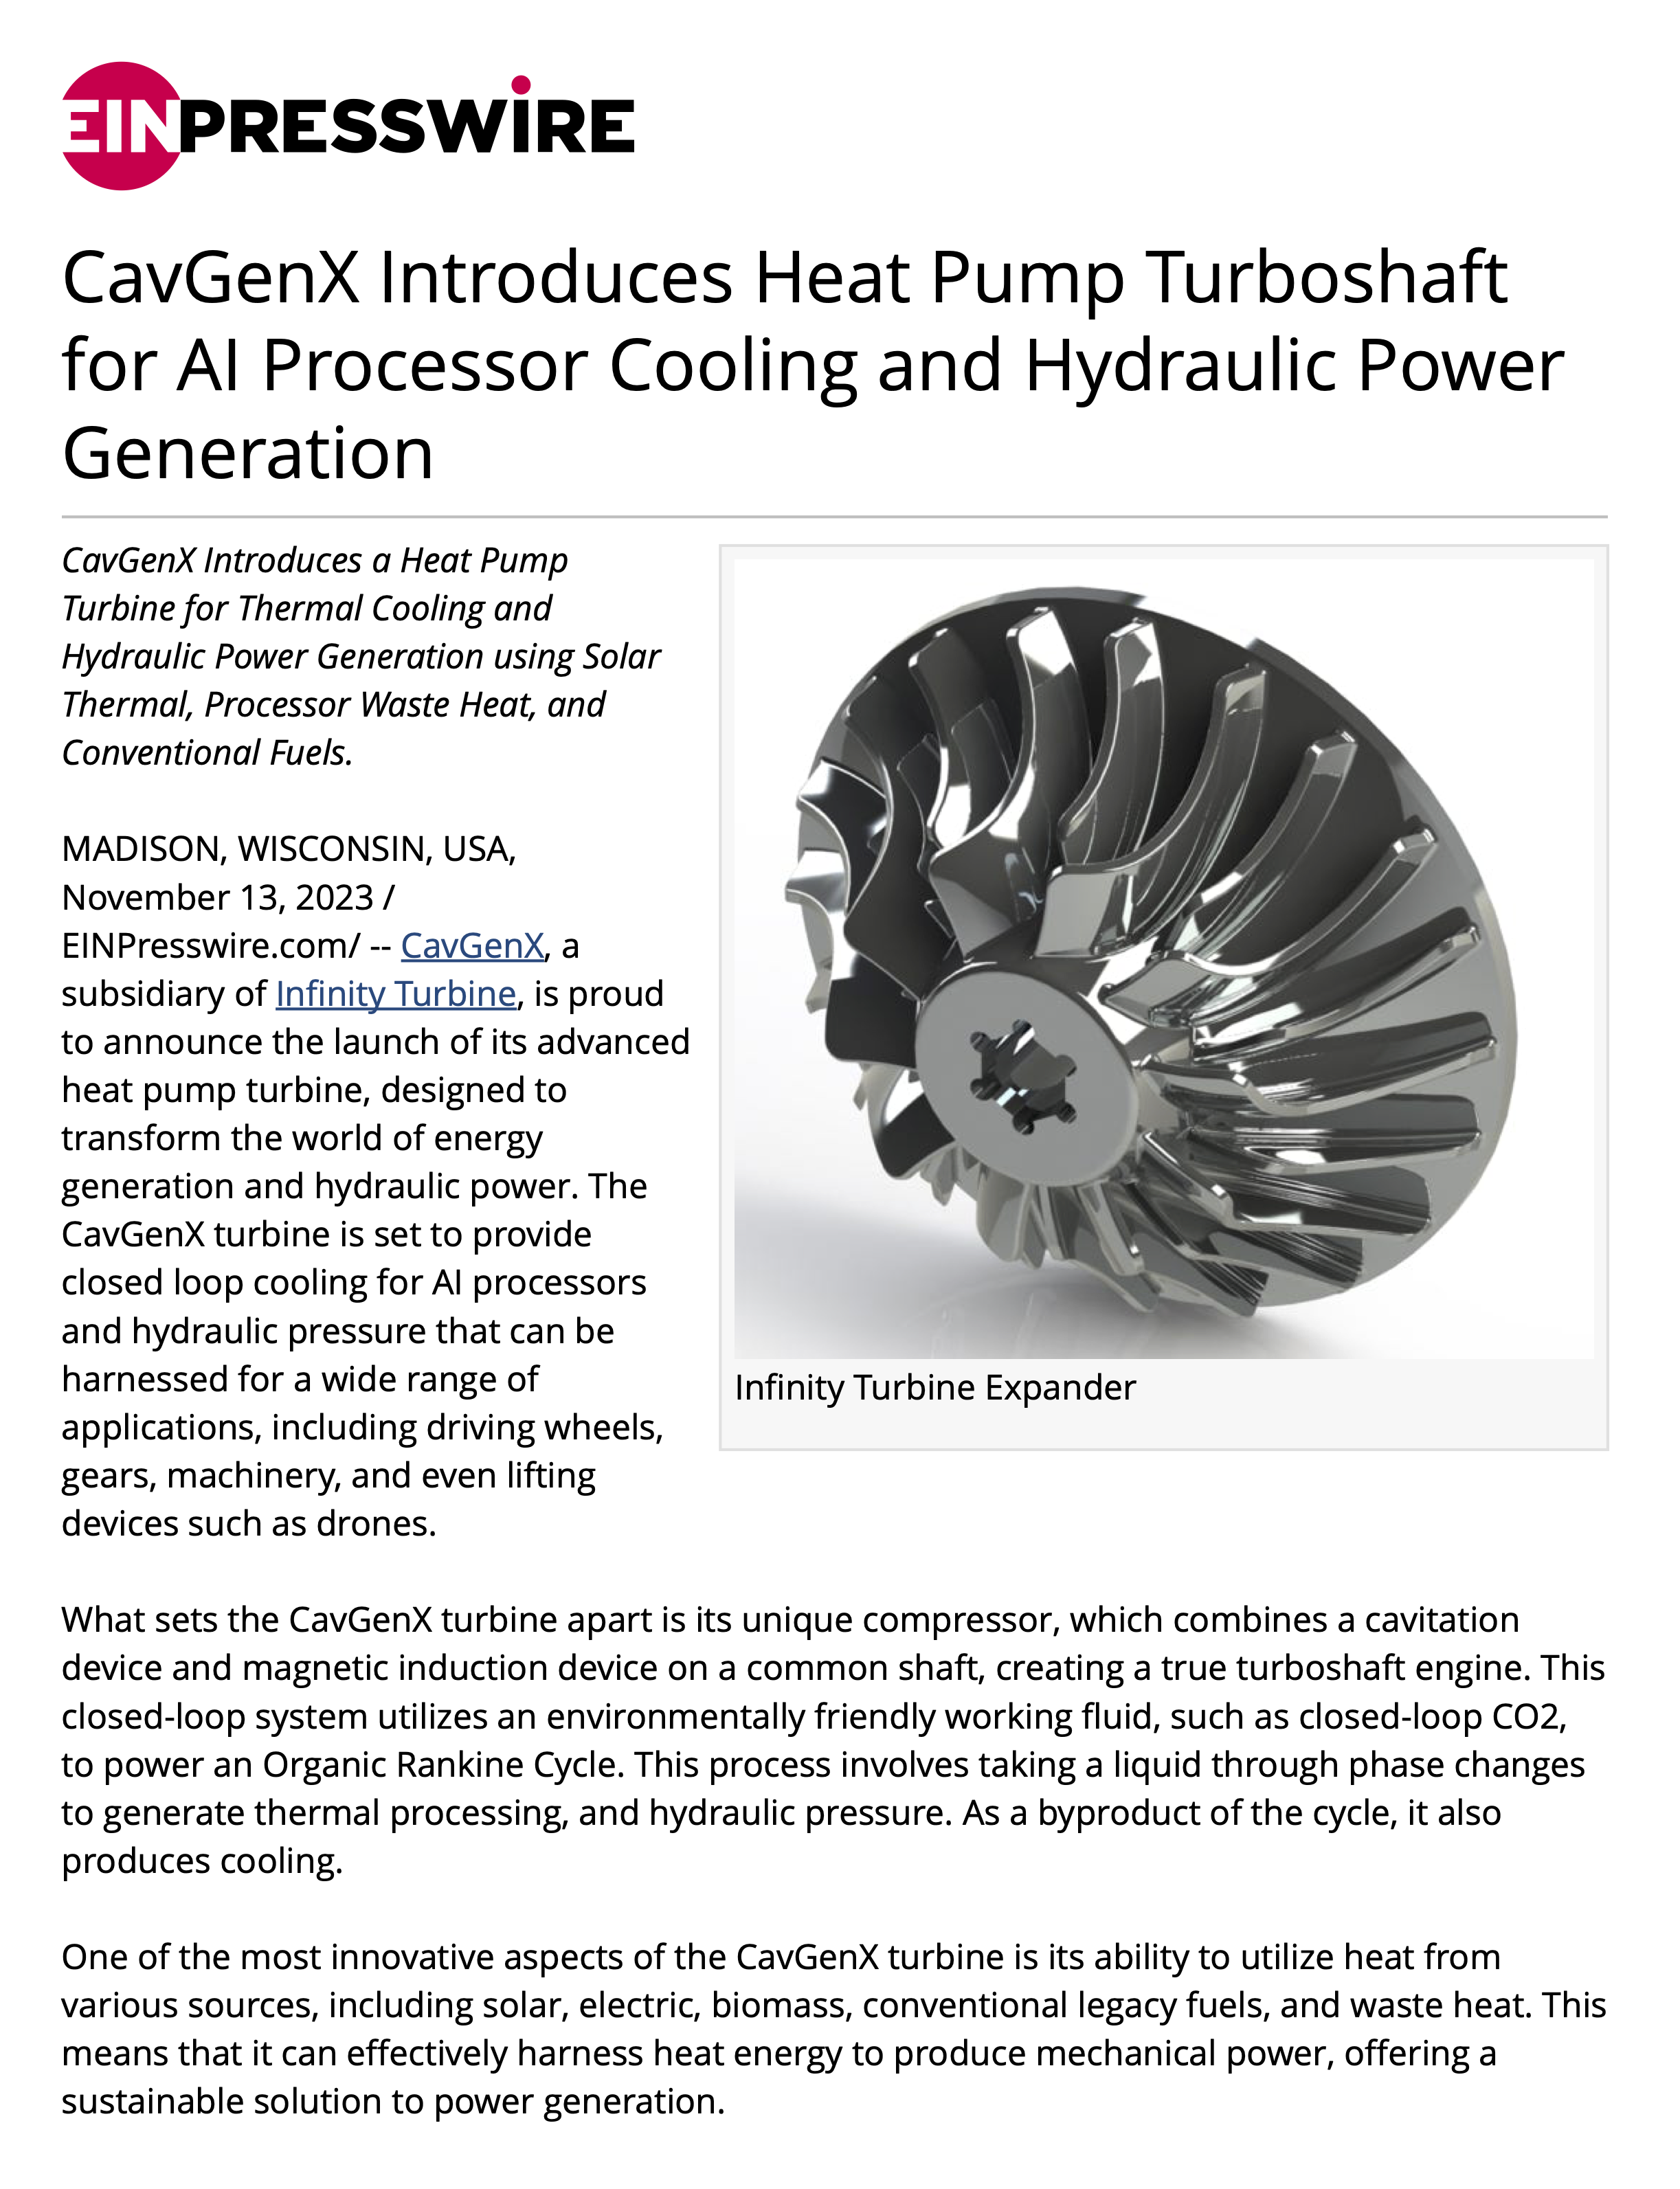 CavGenX Introduces Heat Pump Turboshaft for AI Processor Cooling and Hydraulic Power Generation